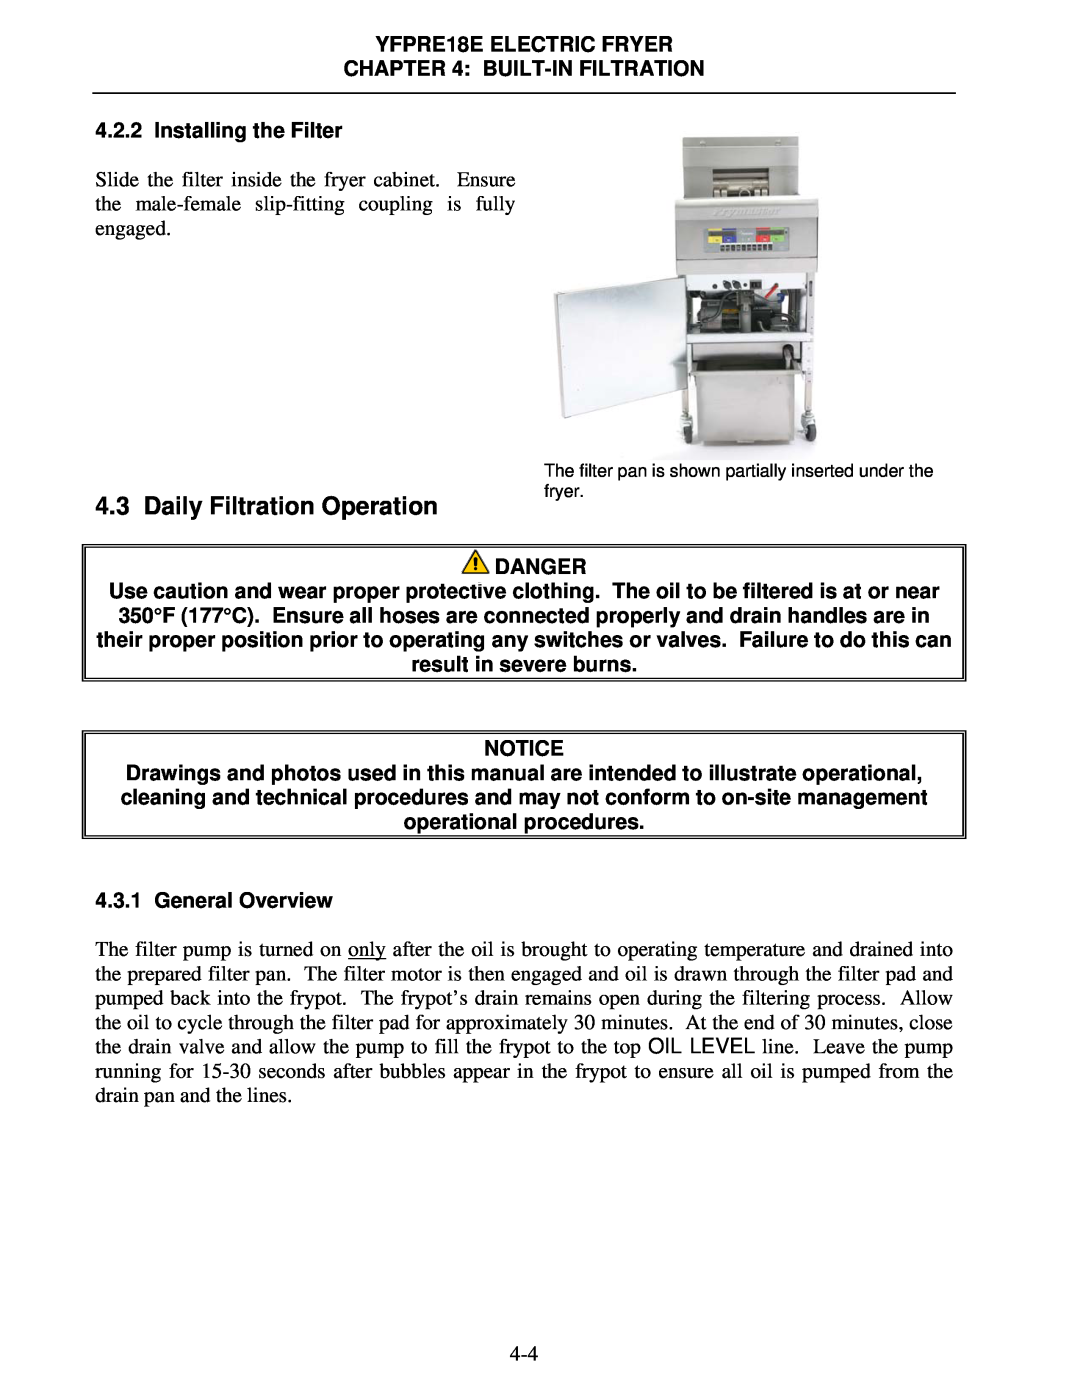 Frymaster YFPRE1817E Daily Filtration Operation, The filter pan is shown partially inserted under the fryer 